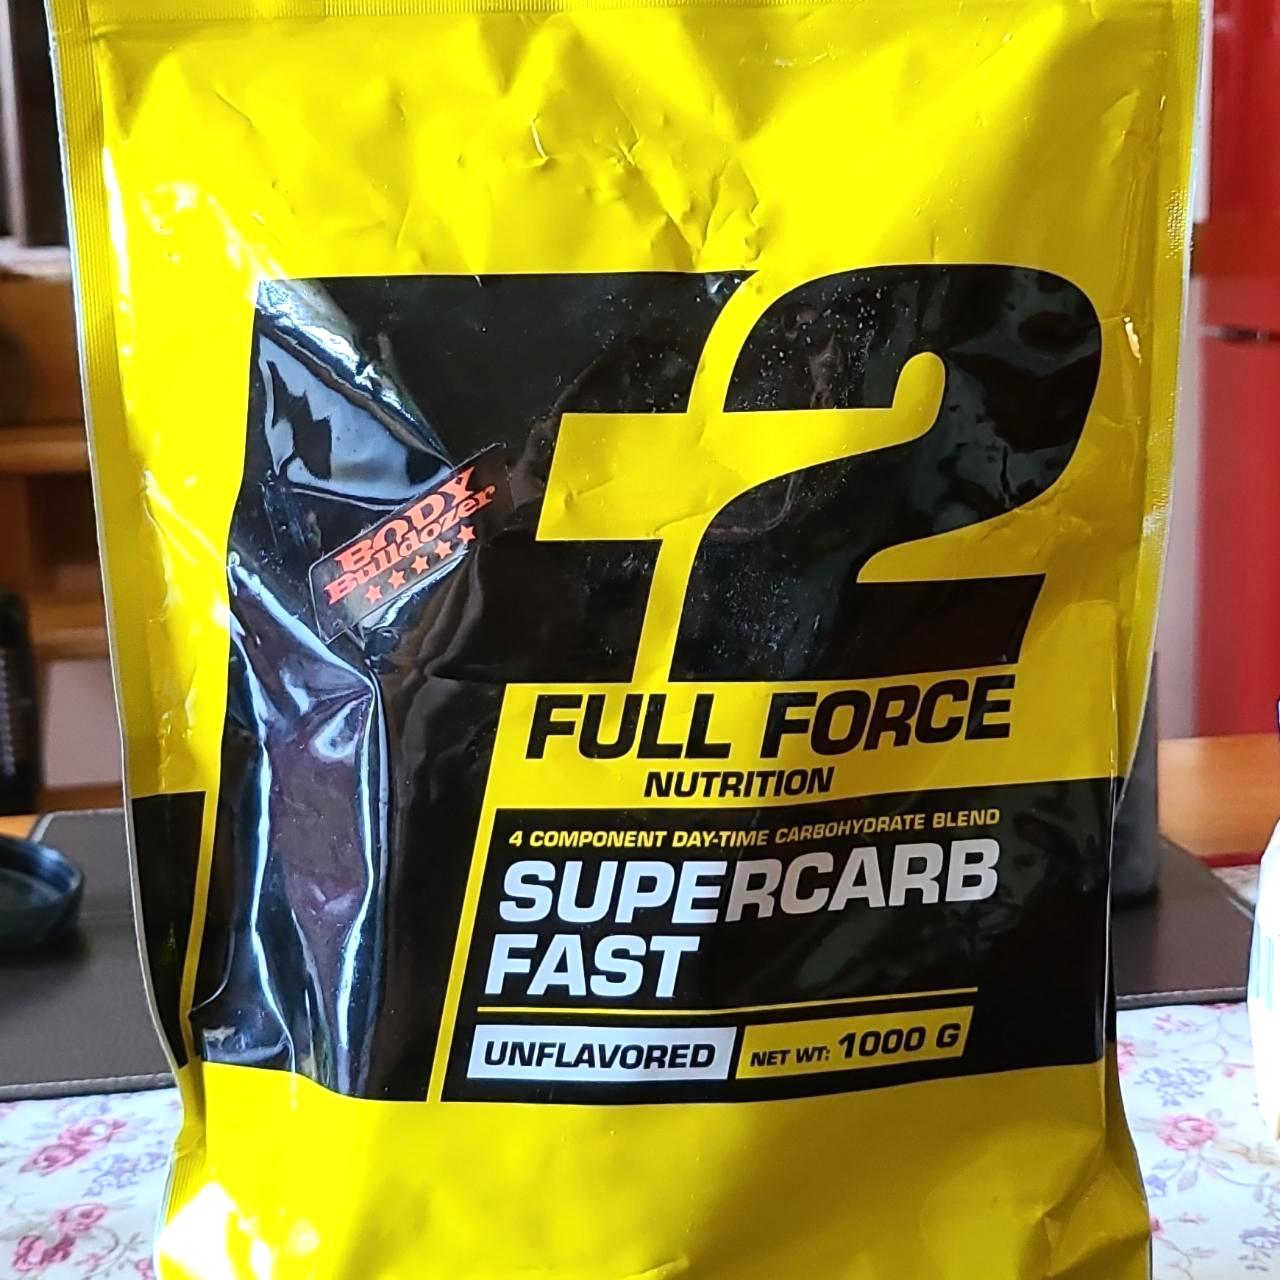 Képek - Supercarbs Fast unflavored F2 Full Force